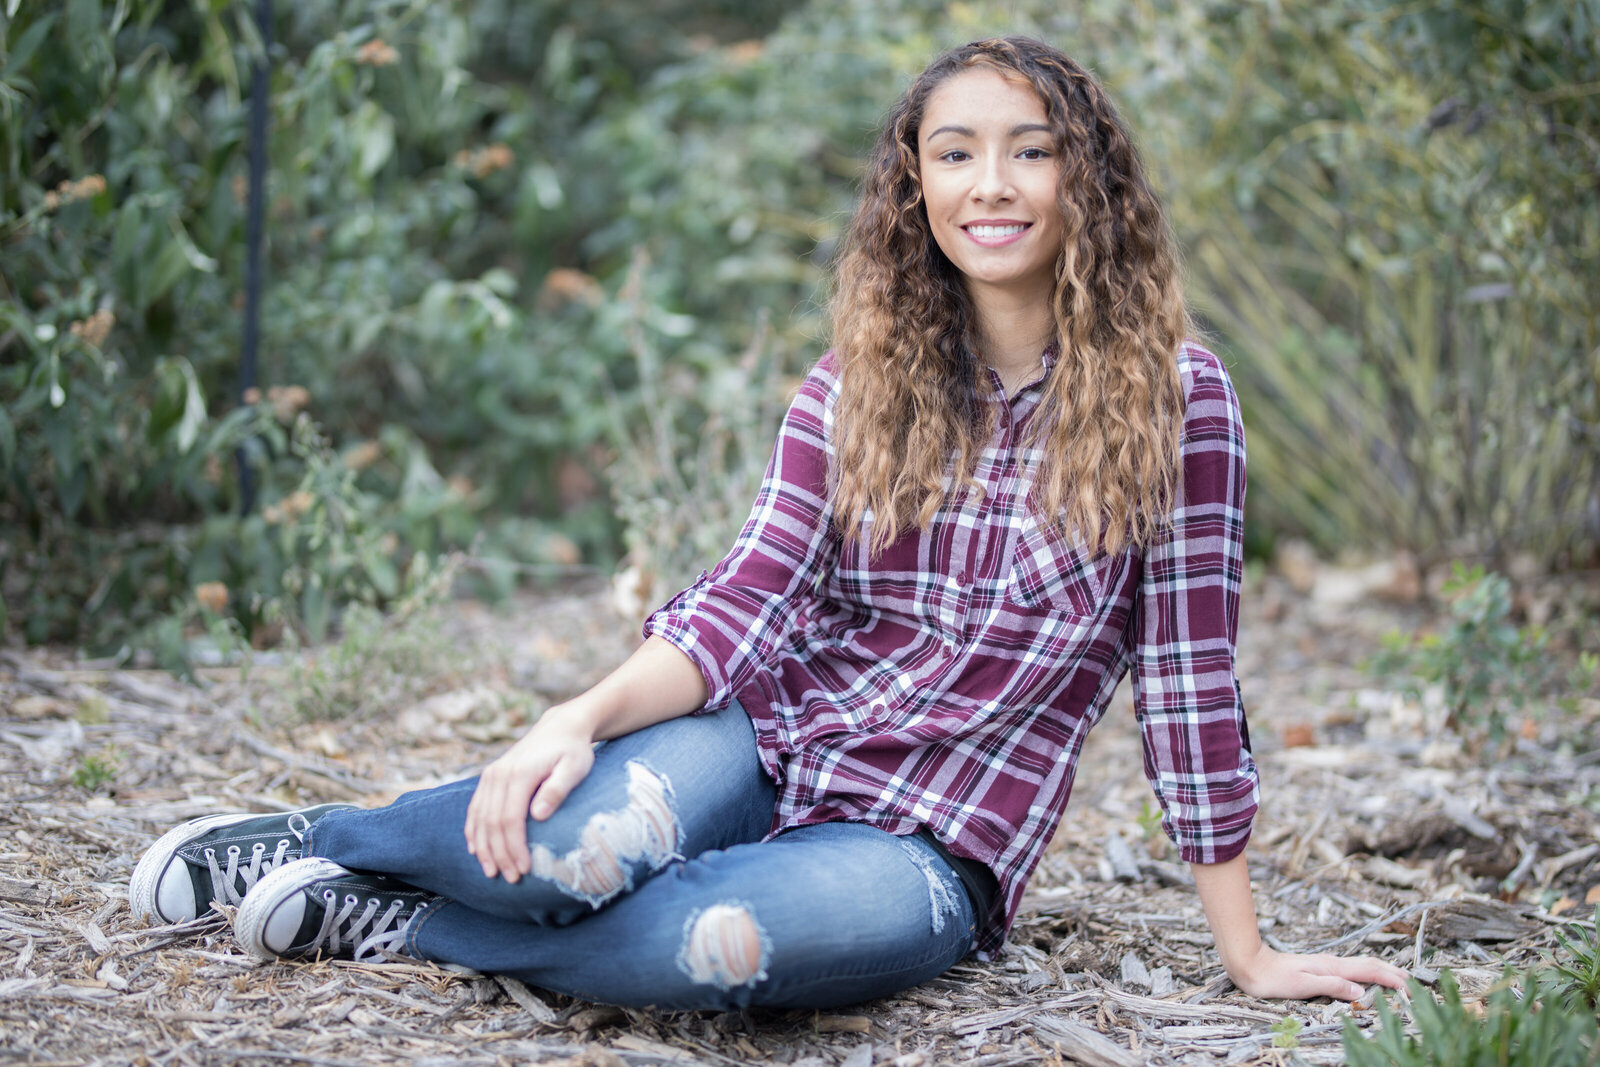 Sitting on the ground in a plaid shirt during a senior photo shoot